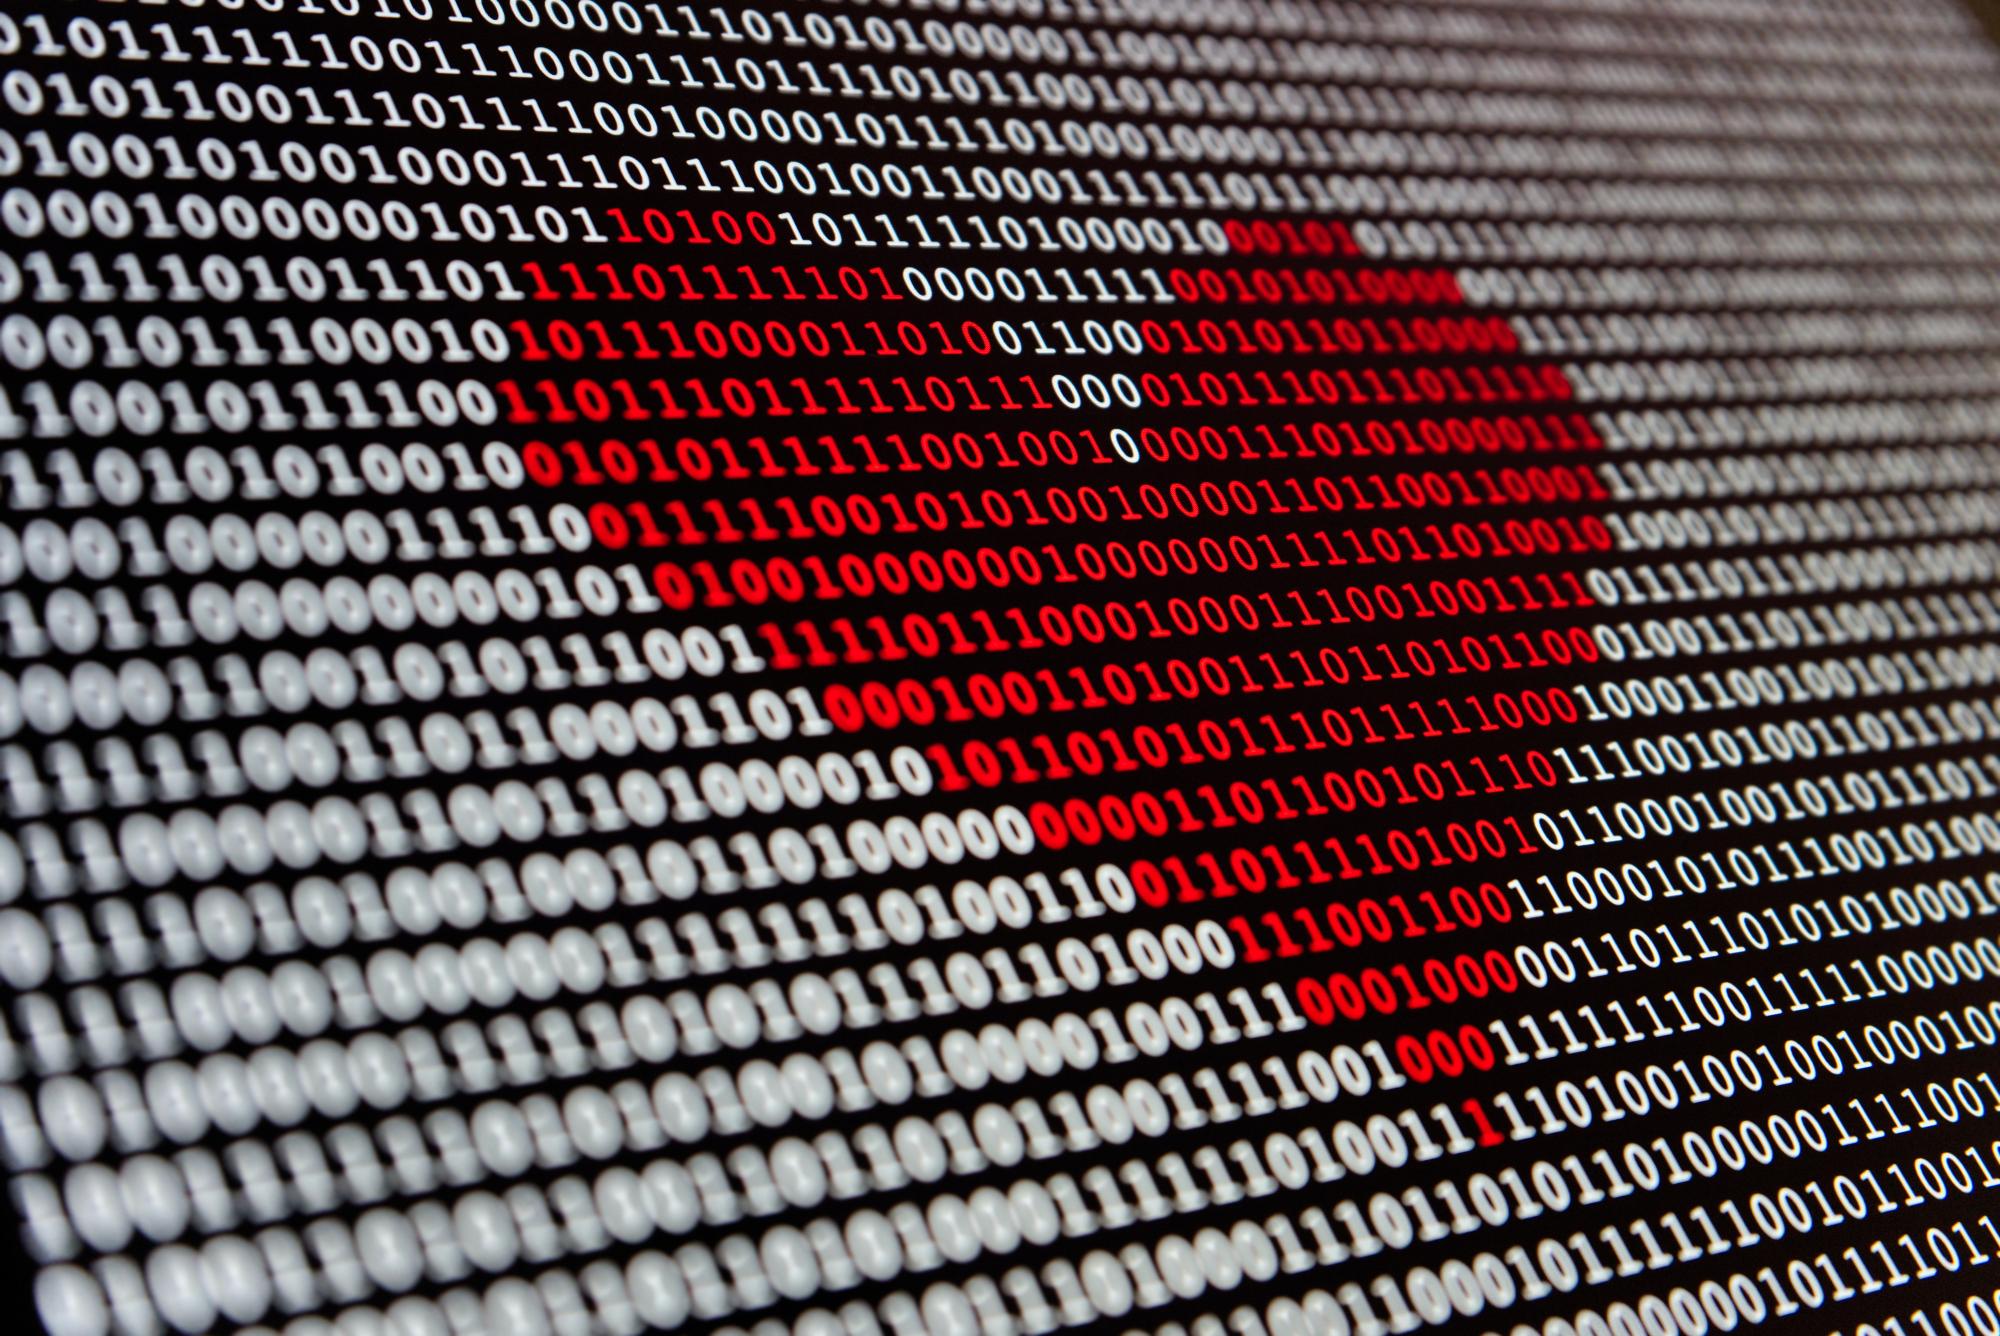 Image of a heart made of binary code.